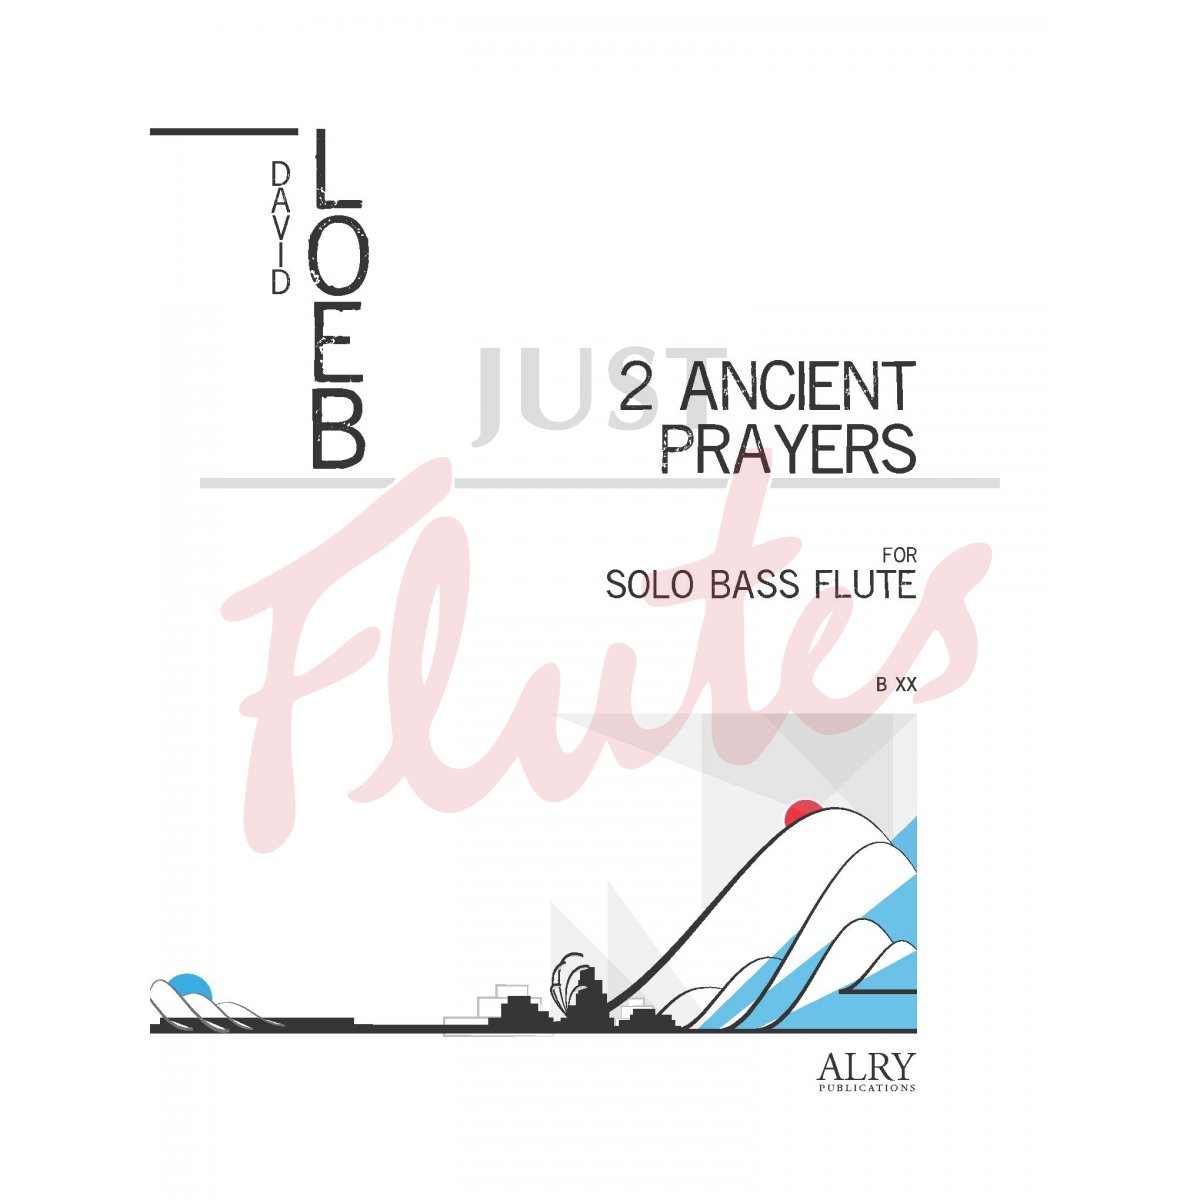 2 Ancient Prayers for Solo Bass Flute